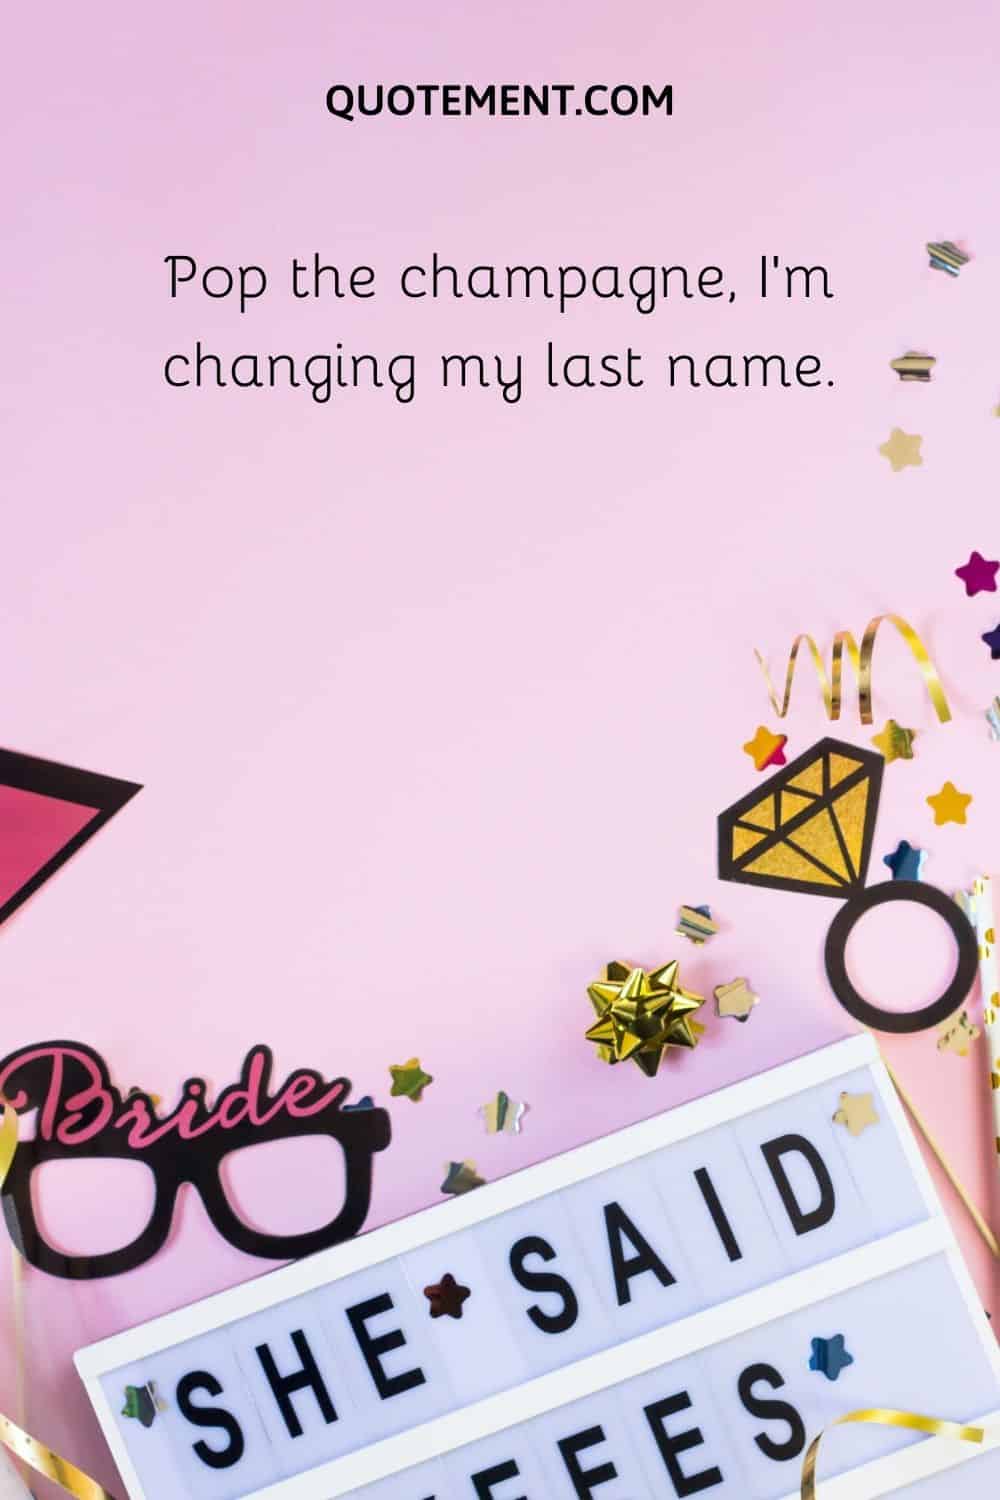 Pop the champagne, I'm changing my last name.